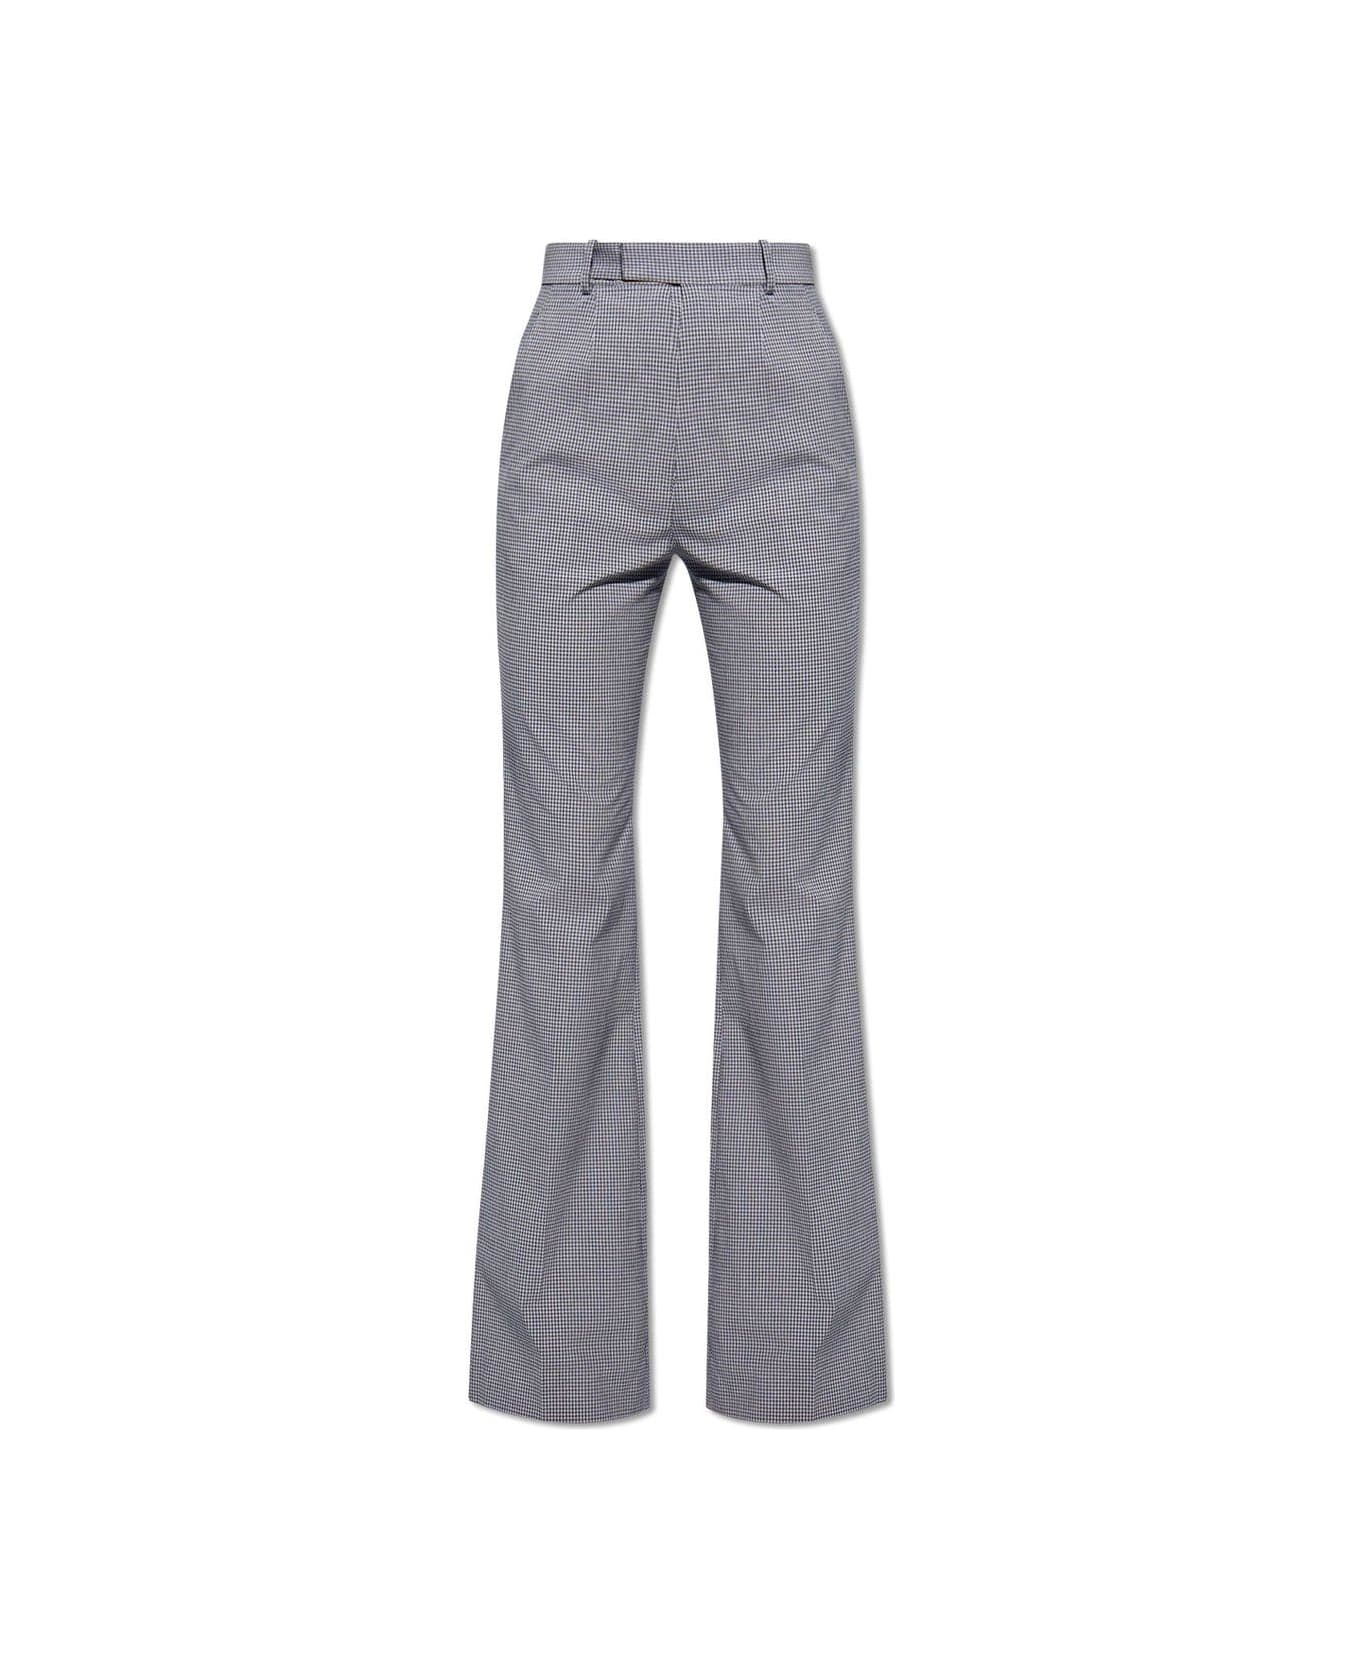 Vivienne Westwood Ray Checked Trousers - Grigio ボトムス